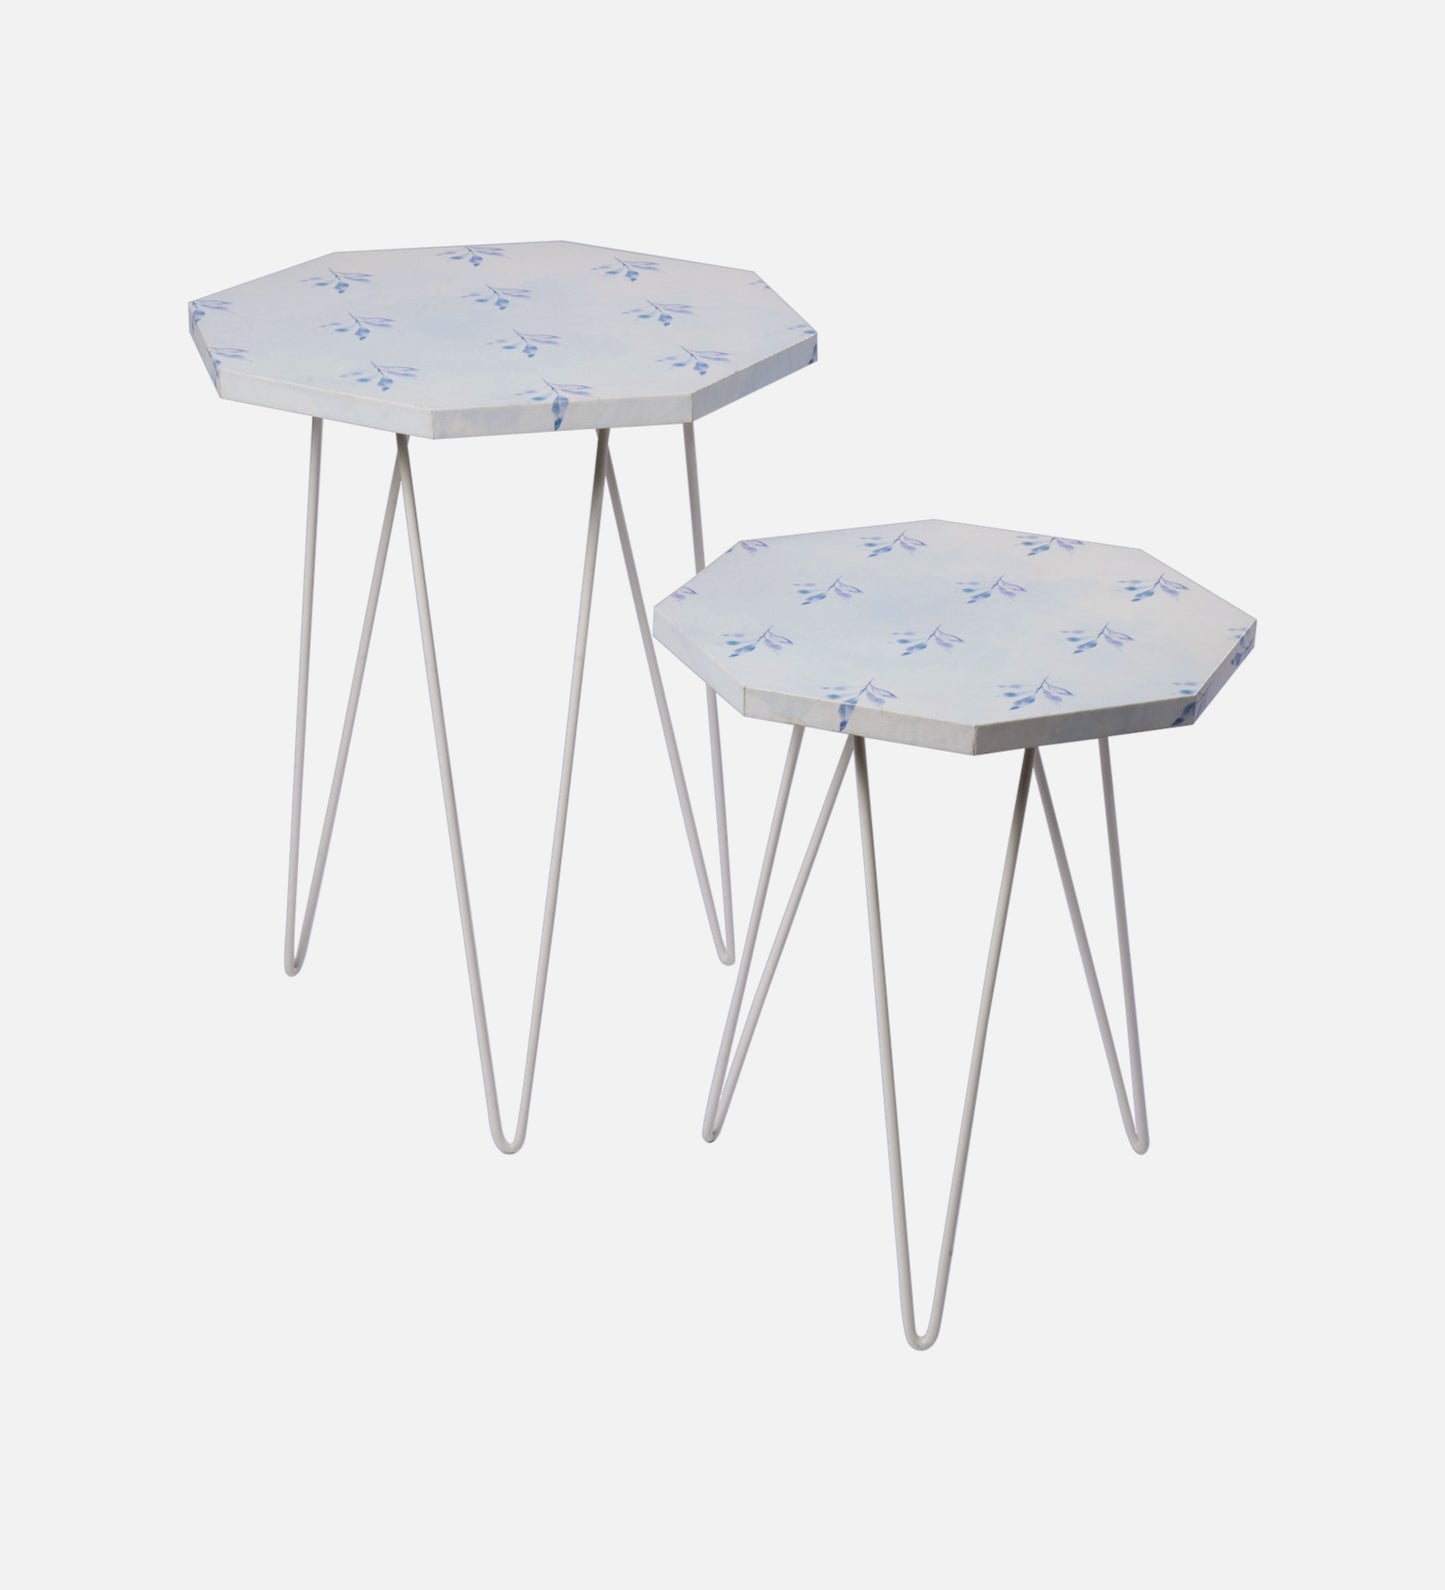 Tiny Twigs Octagon Nesting Tables with Hairpin Legs, Side Tables, Wooden Tables, Living Room Decor by A Tiny Mistake